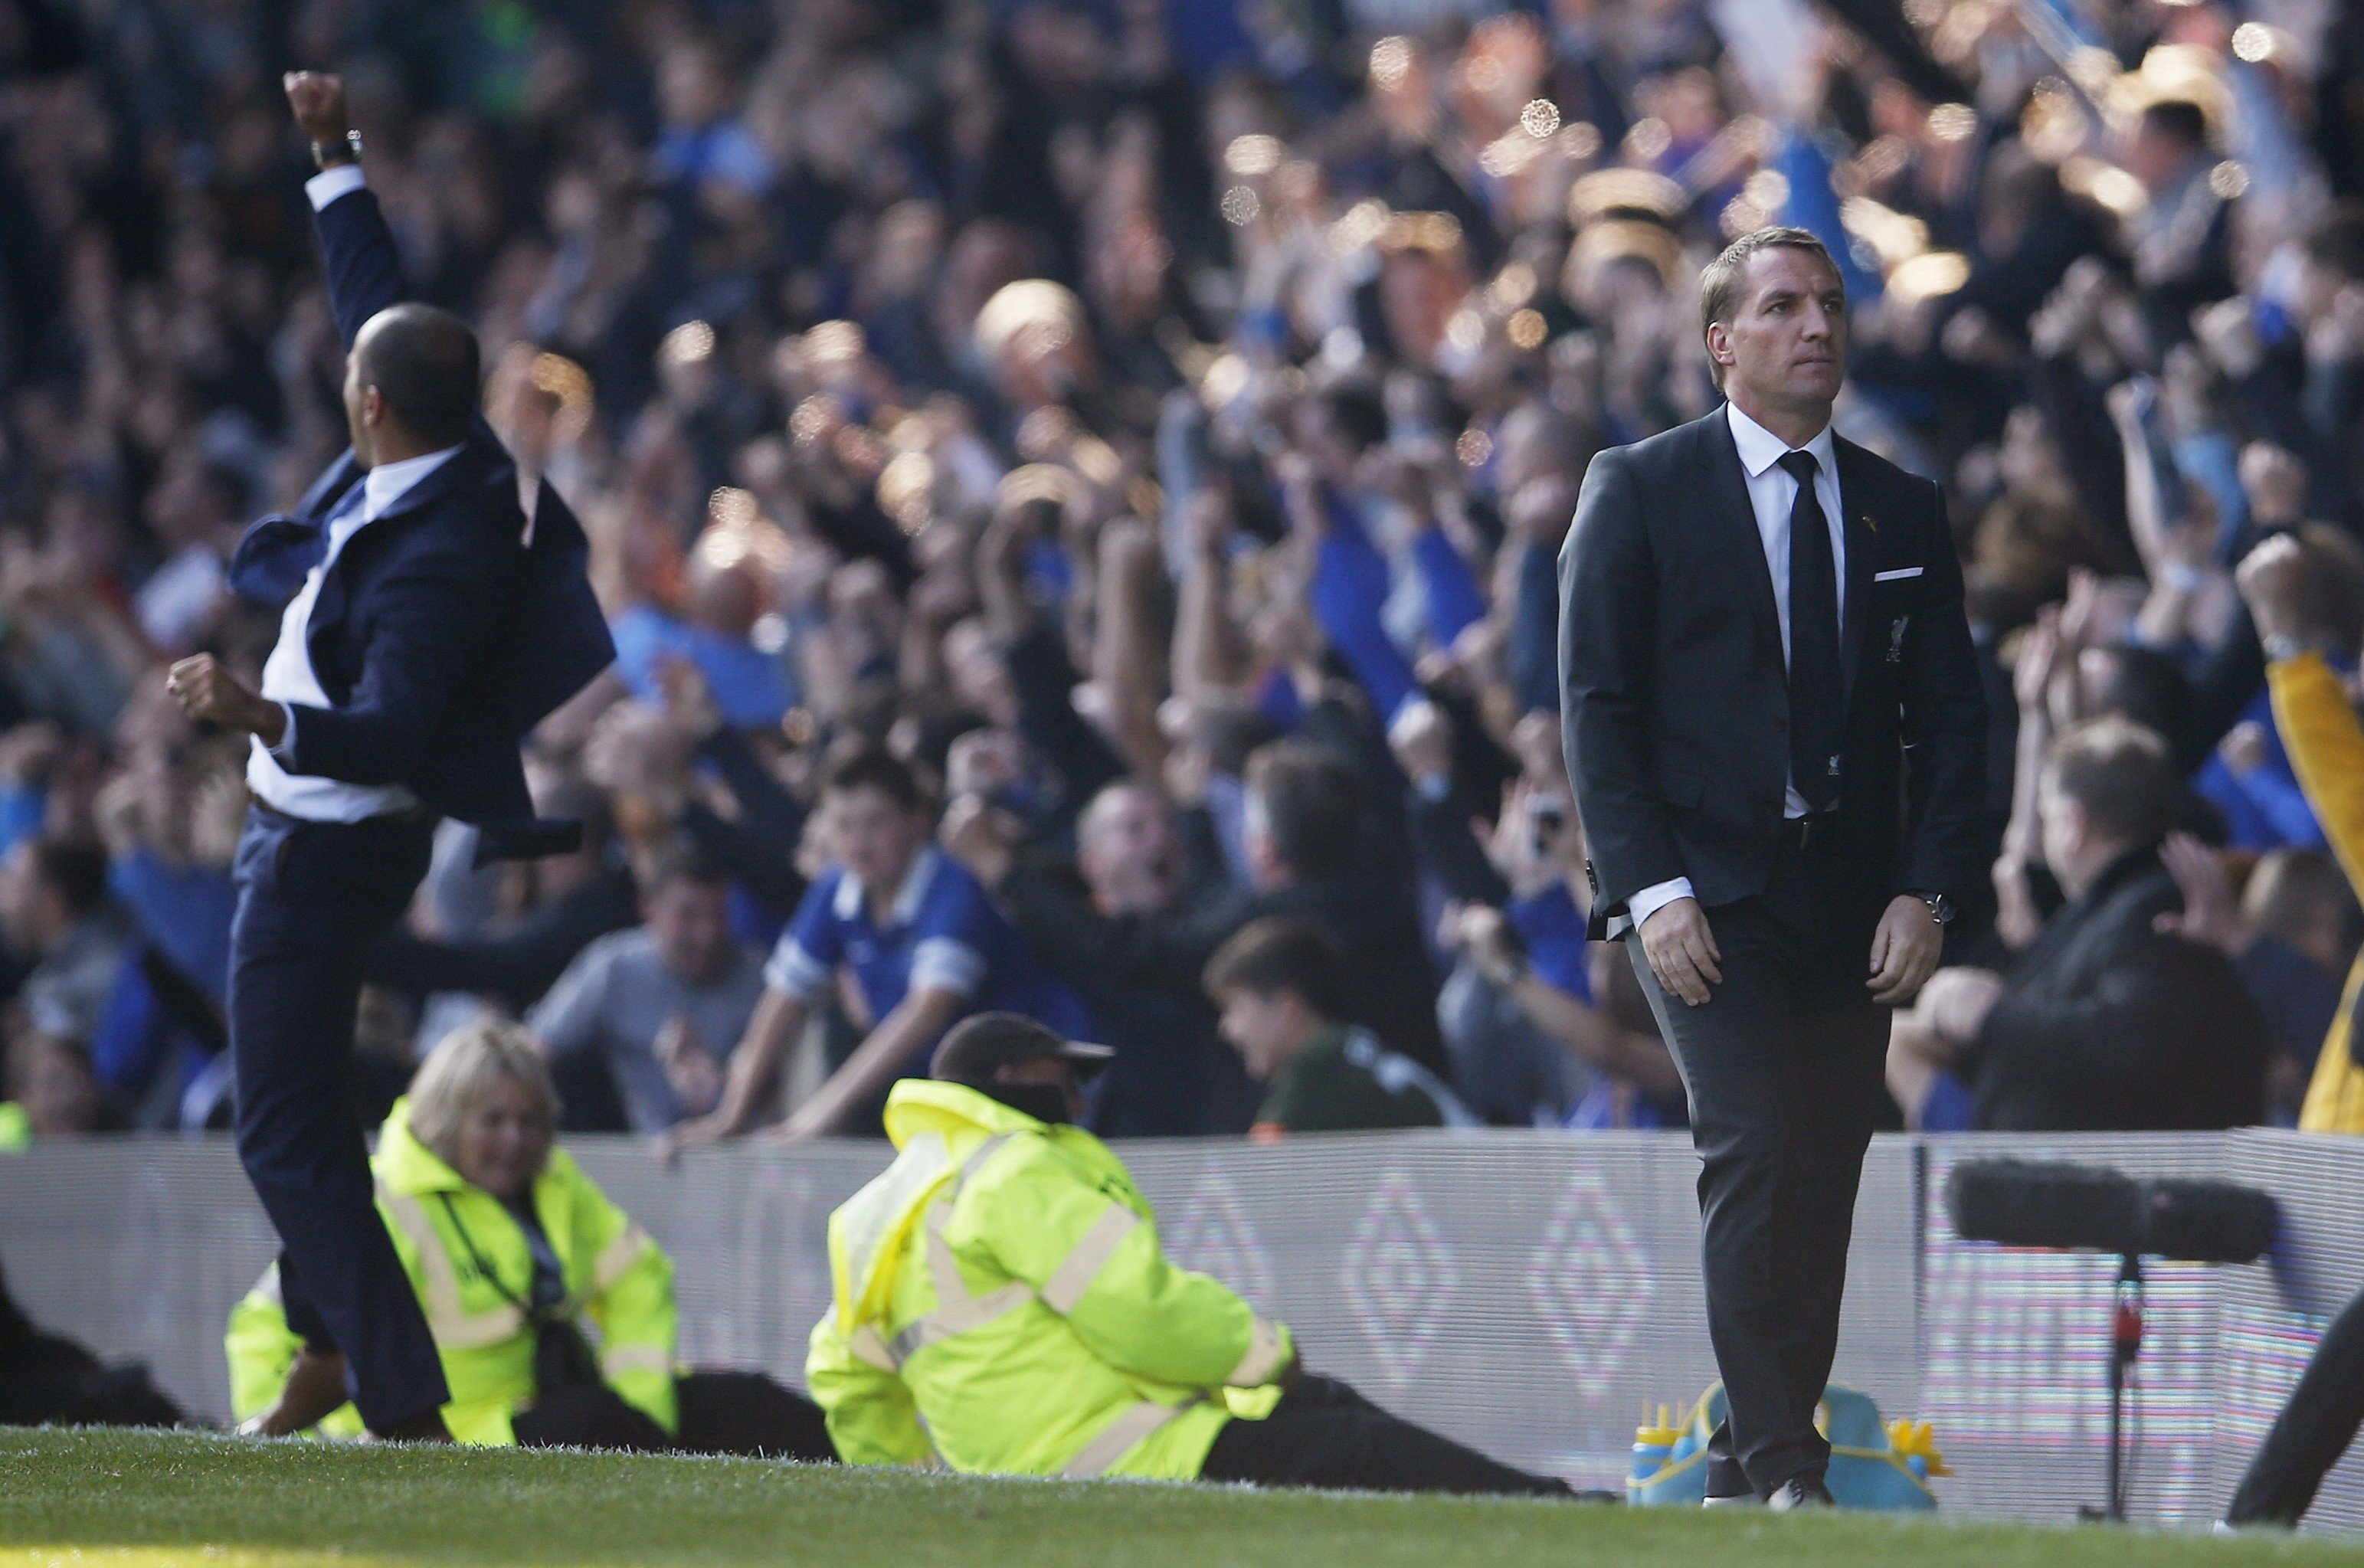 Brendan Rodgers was sacked after Liverpool drew 2-2 in the Merseyside derby at Everton in 2015. Photo: Reuters